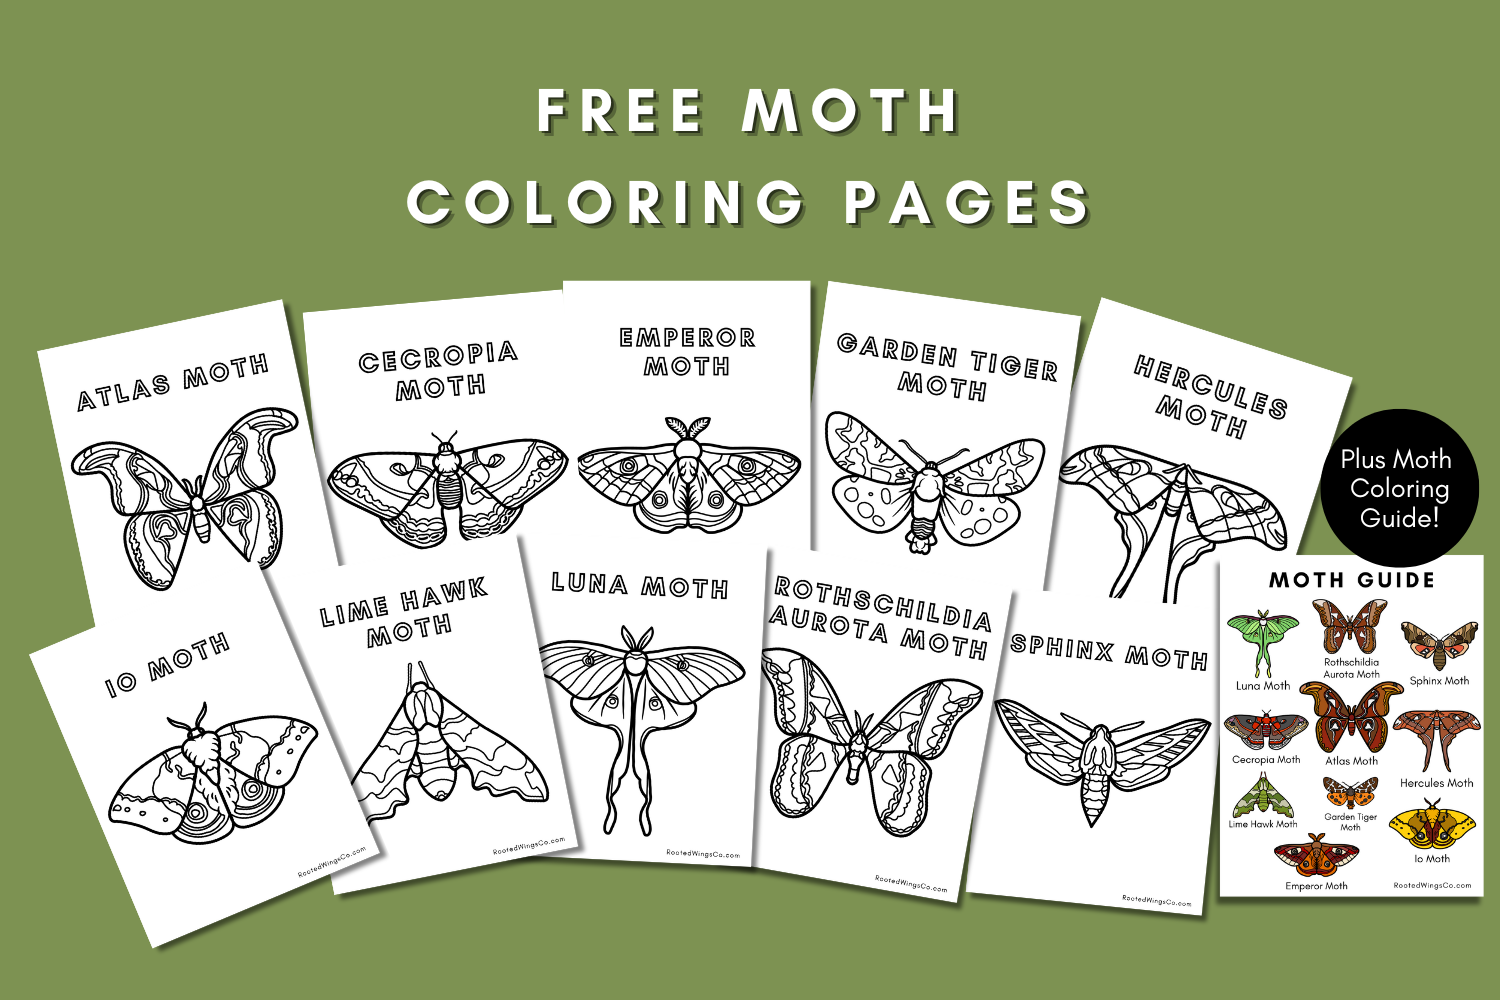 Free Moth Coloring Pages